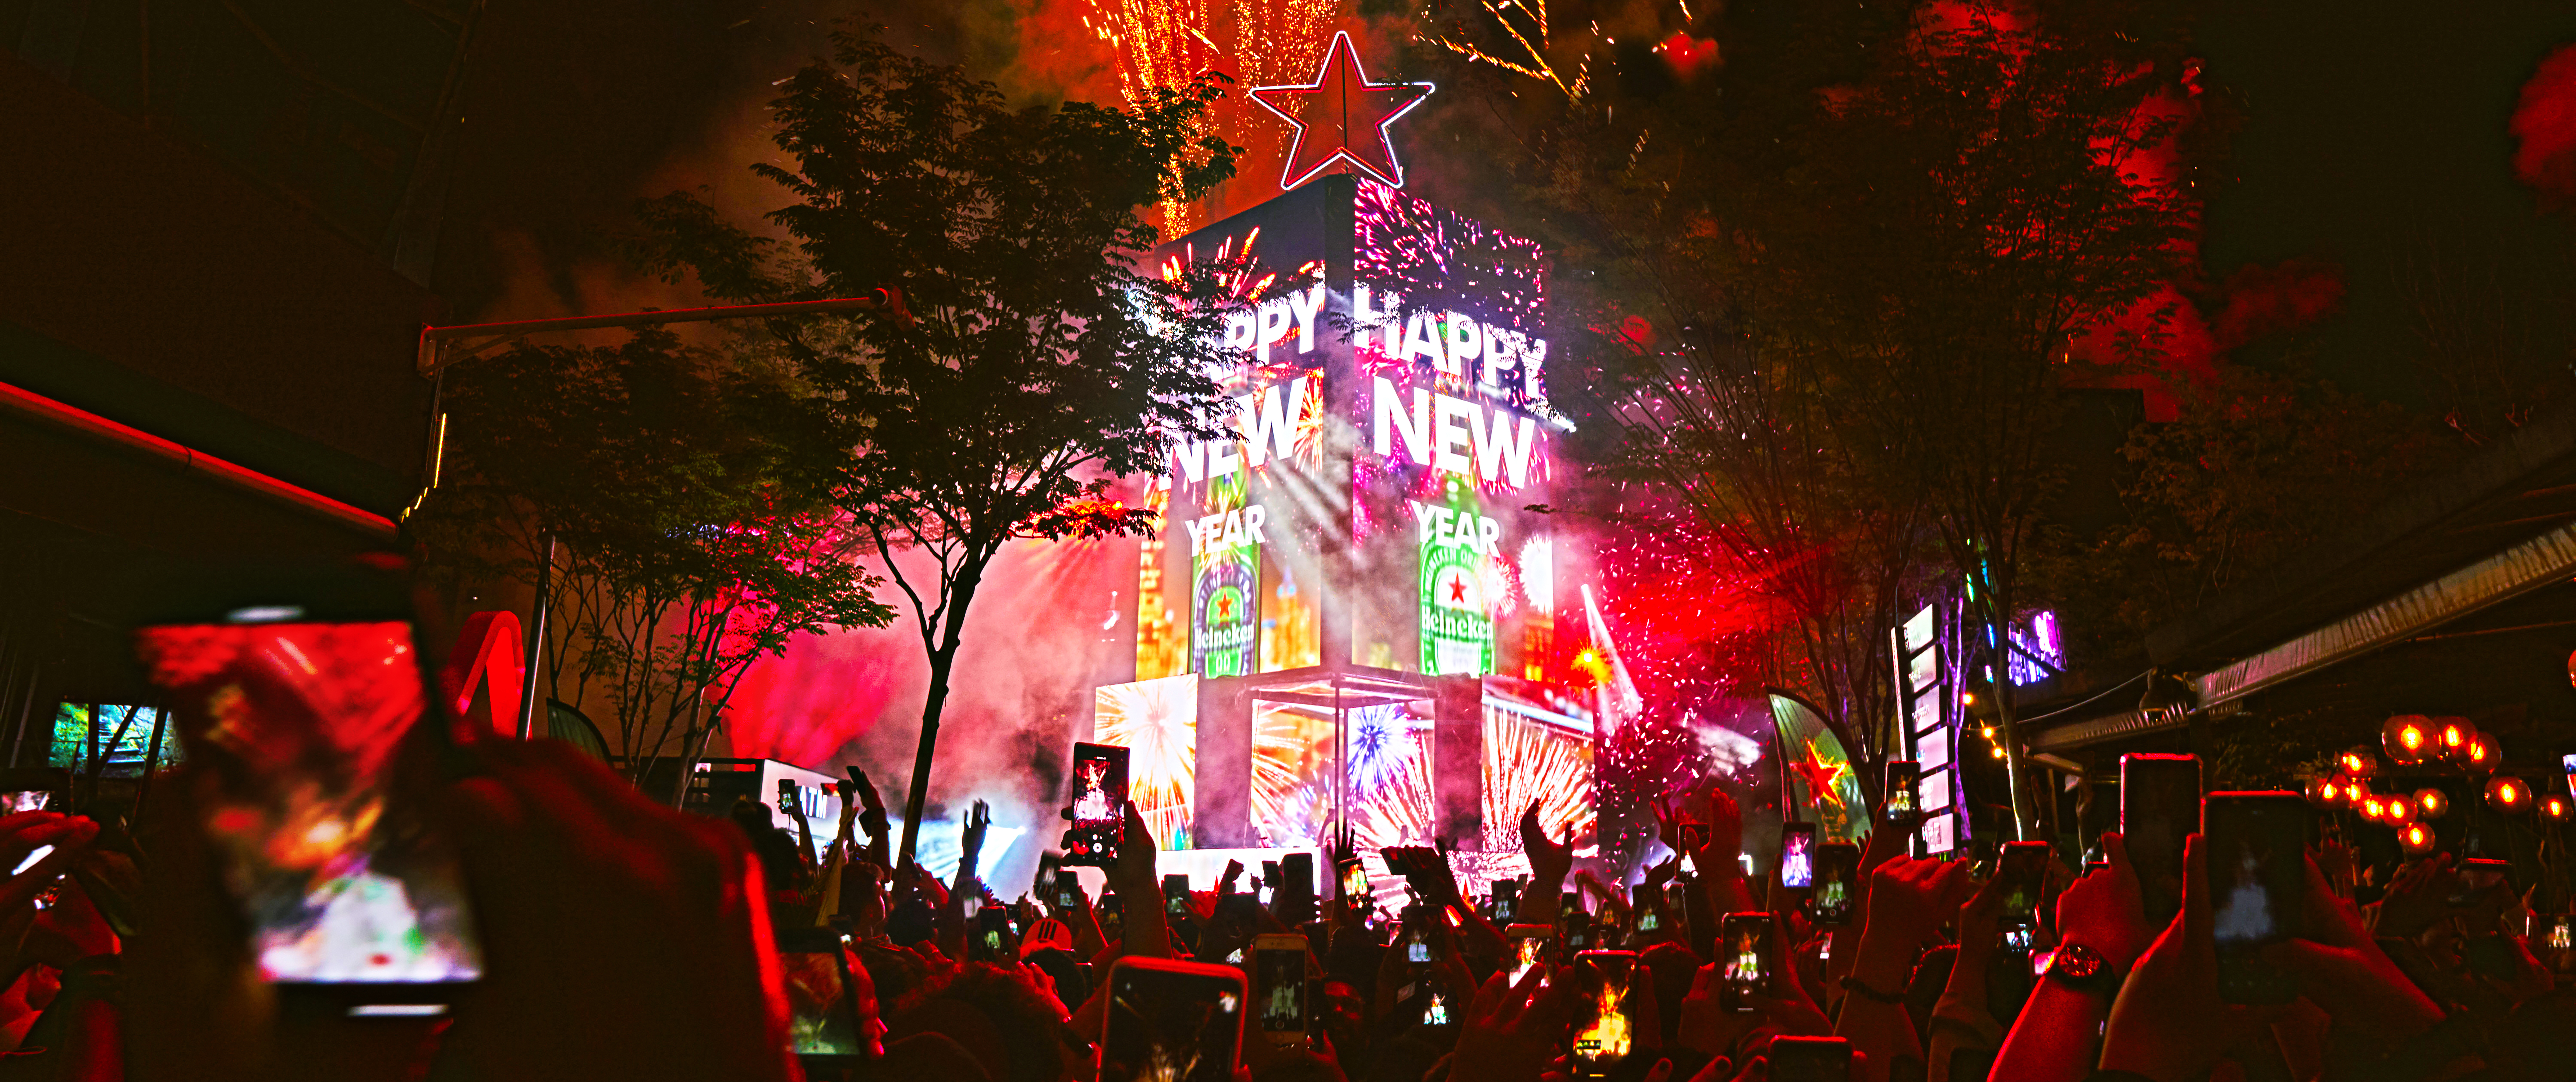 Heineken® ushered in the new year with a dazzling display of fireworks-v3